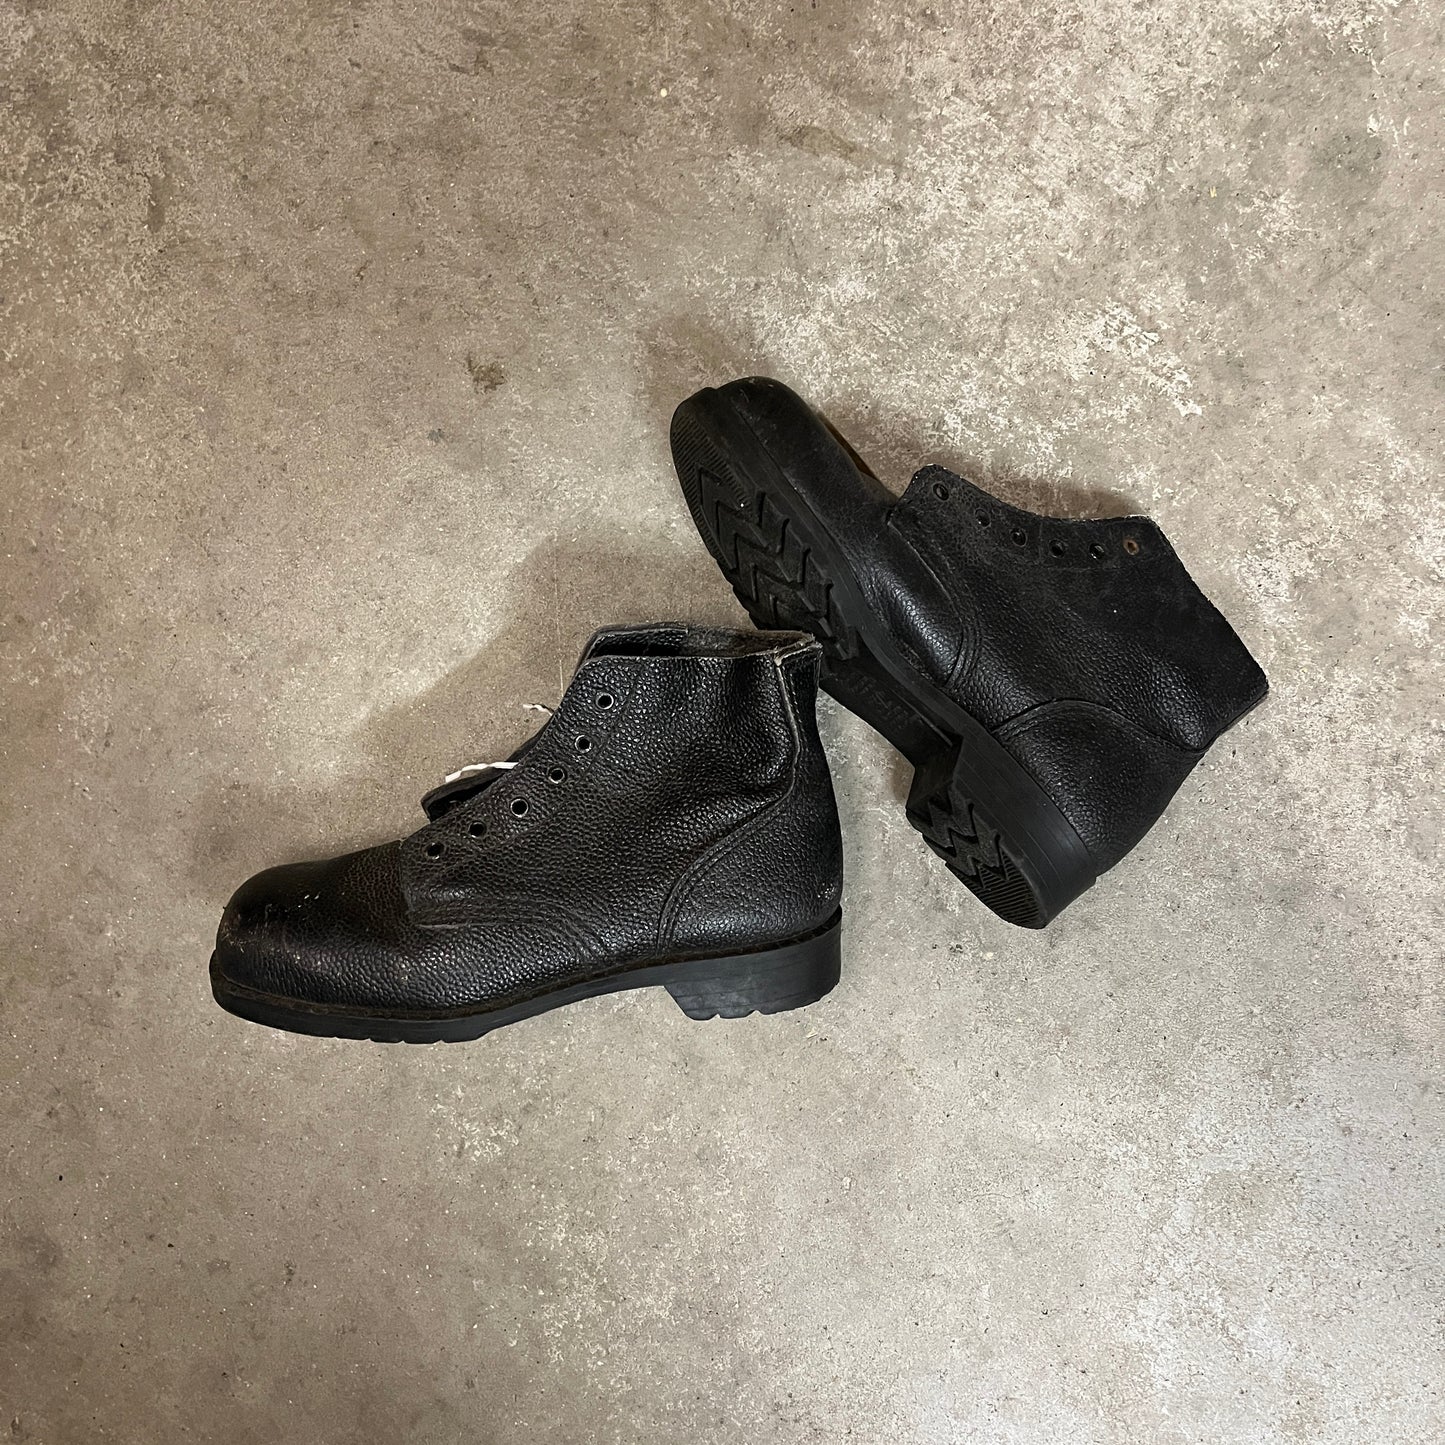 Dated 1979 British Army Boots